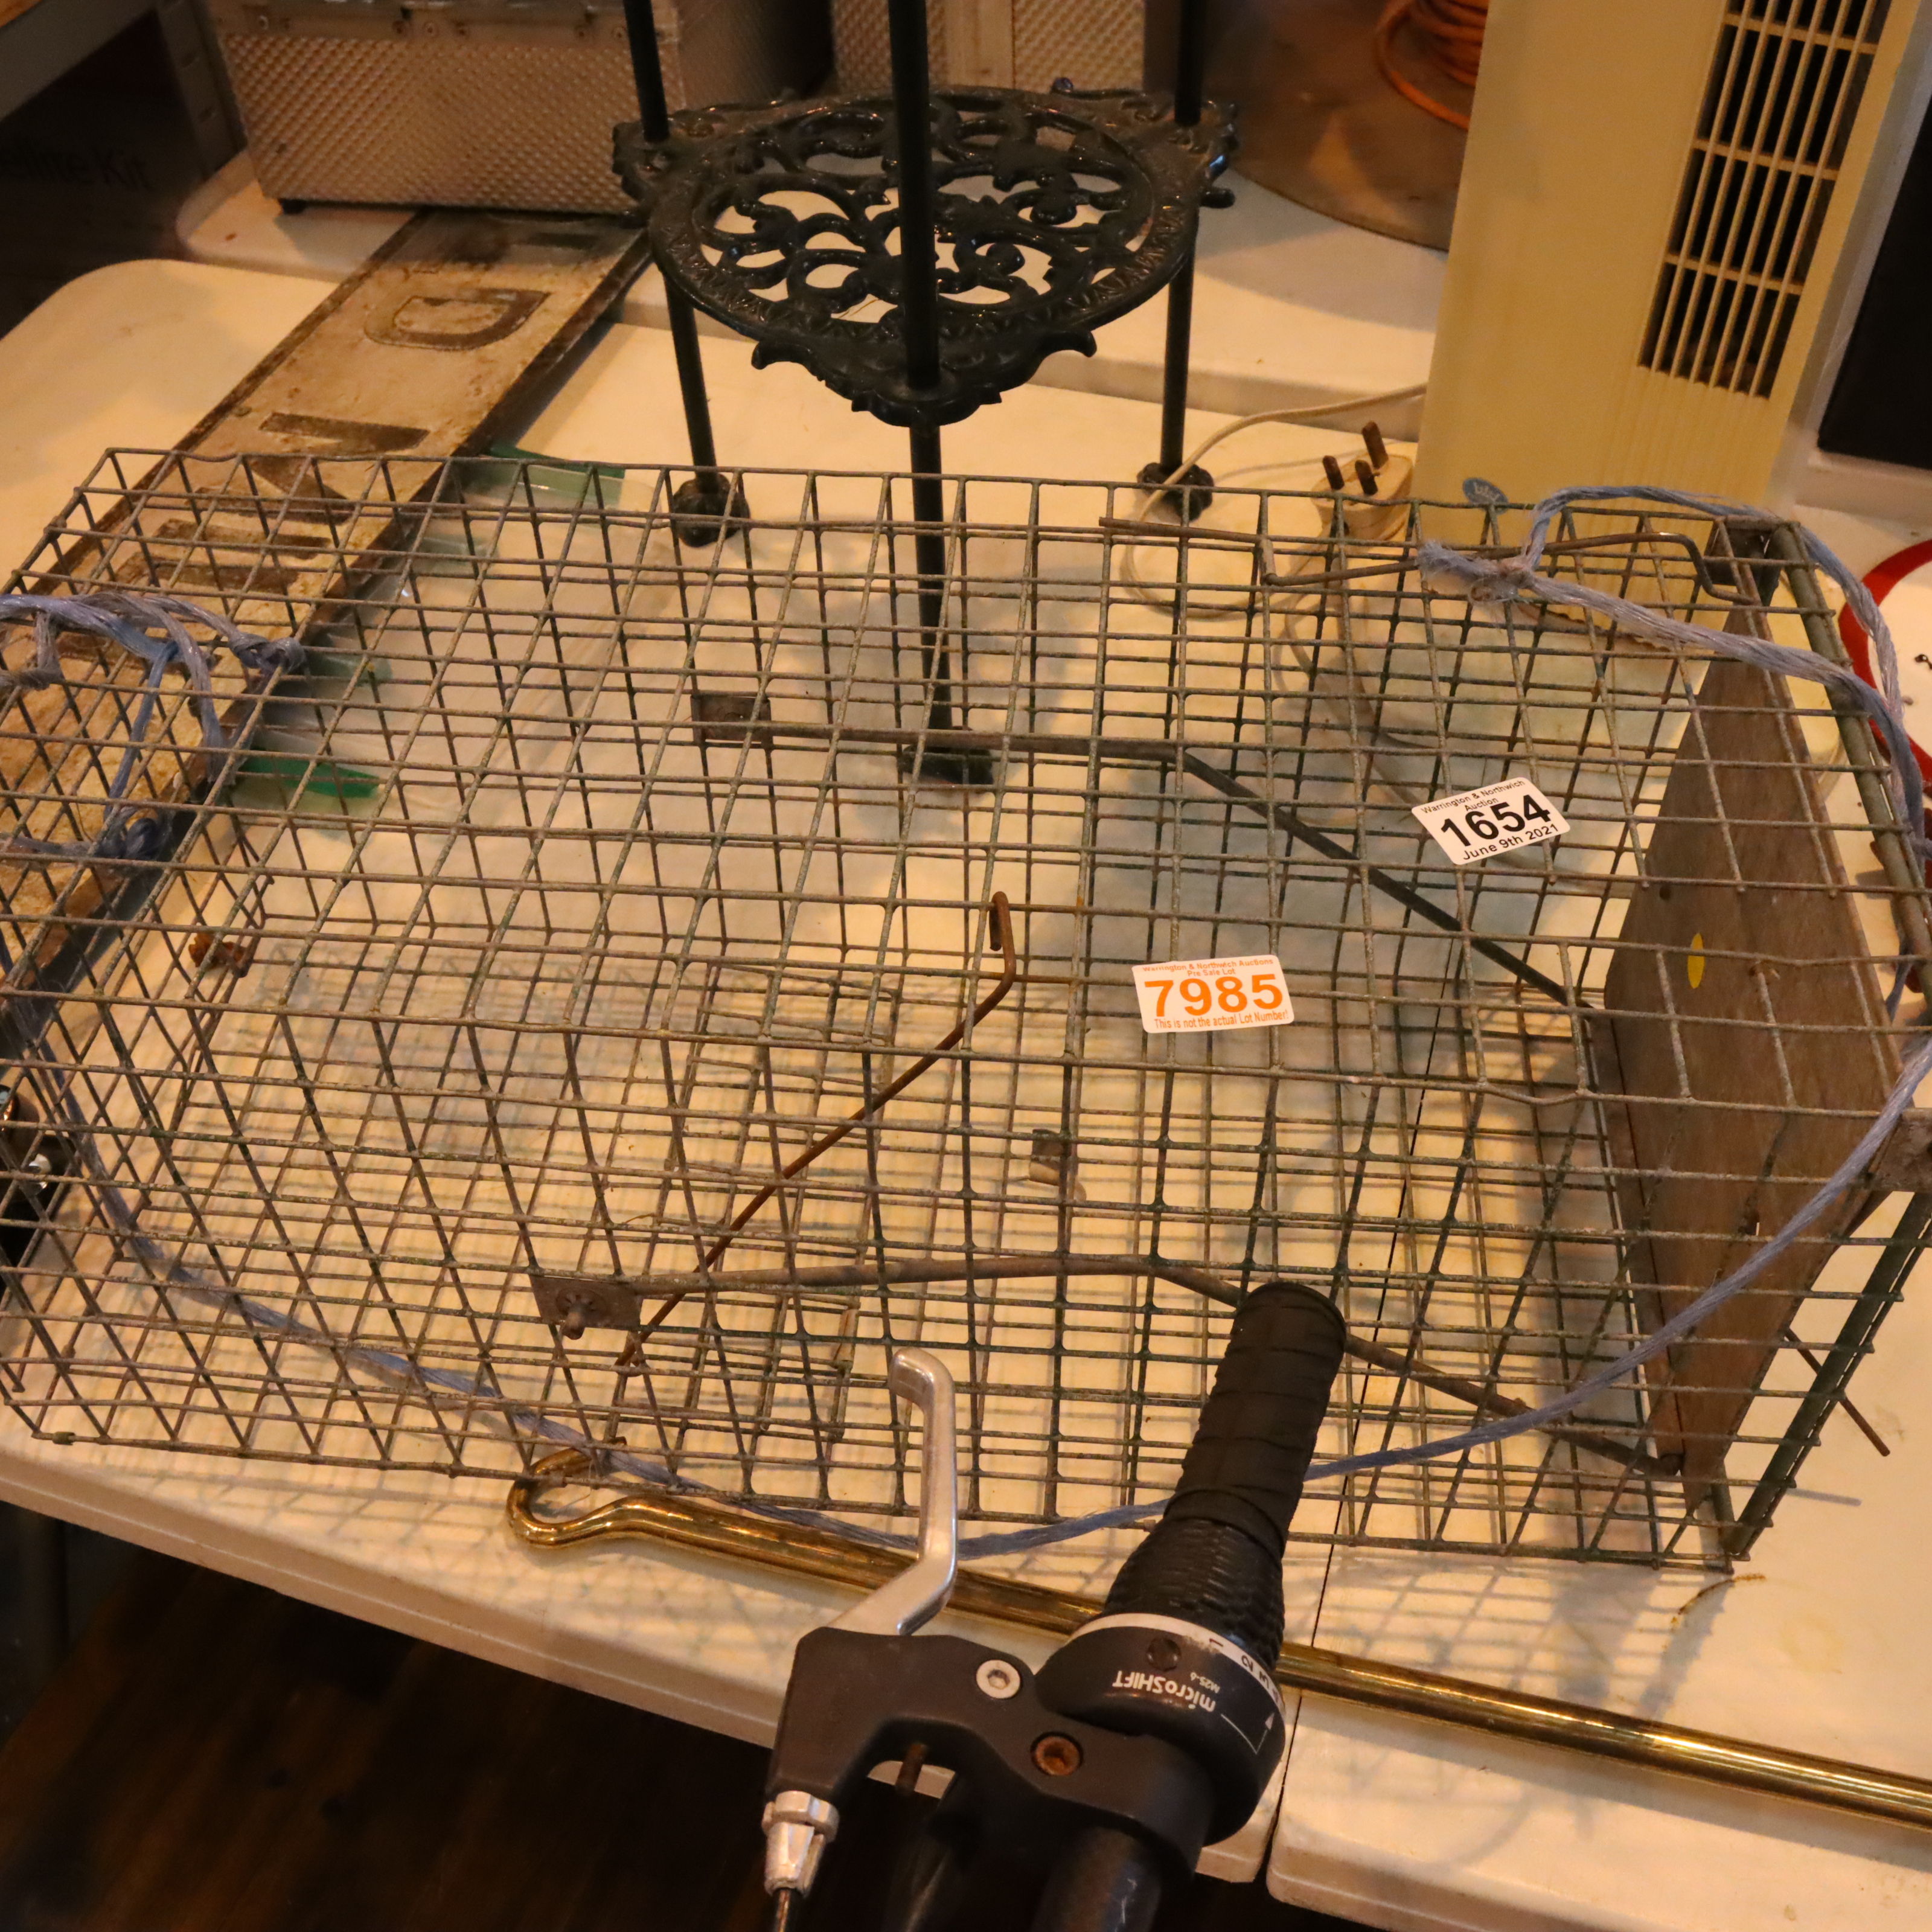 Large wire rat trap. Not available for in-house P&P, contact Paul O'Hea at Mailboxes on 01925 659133